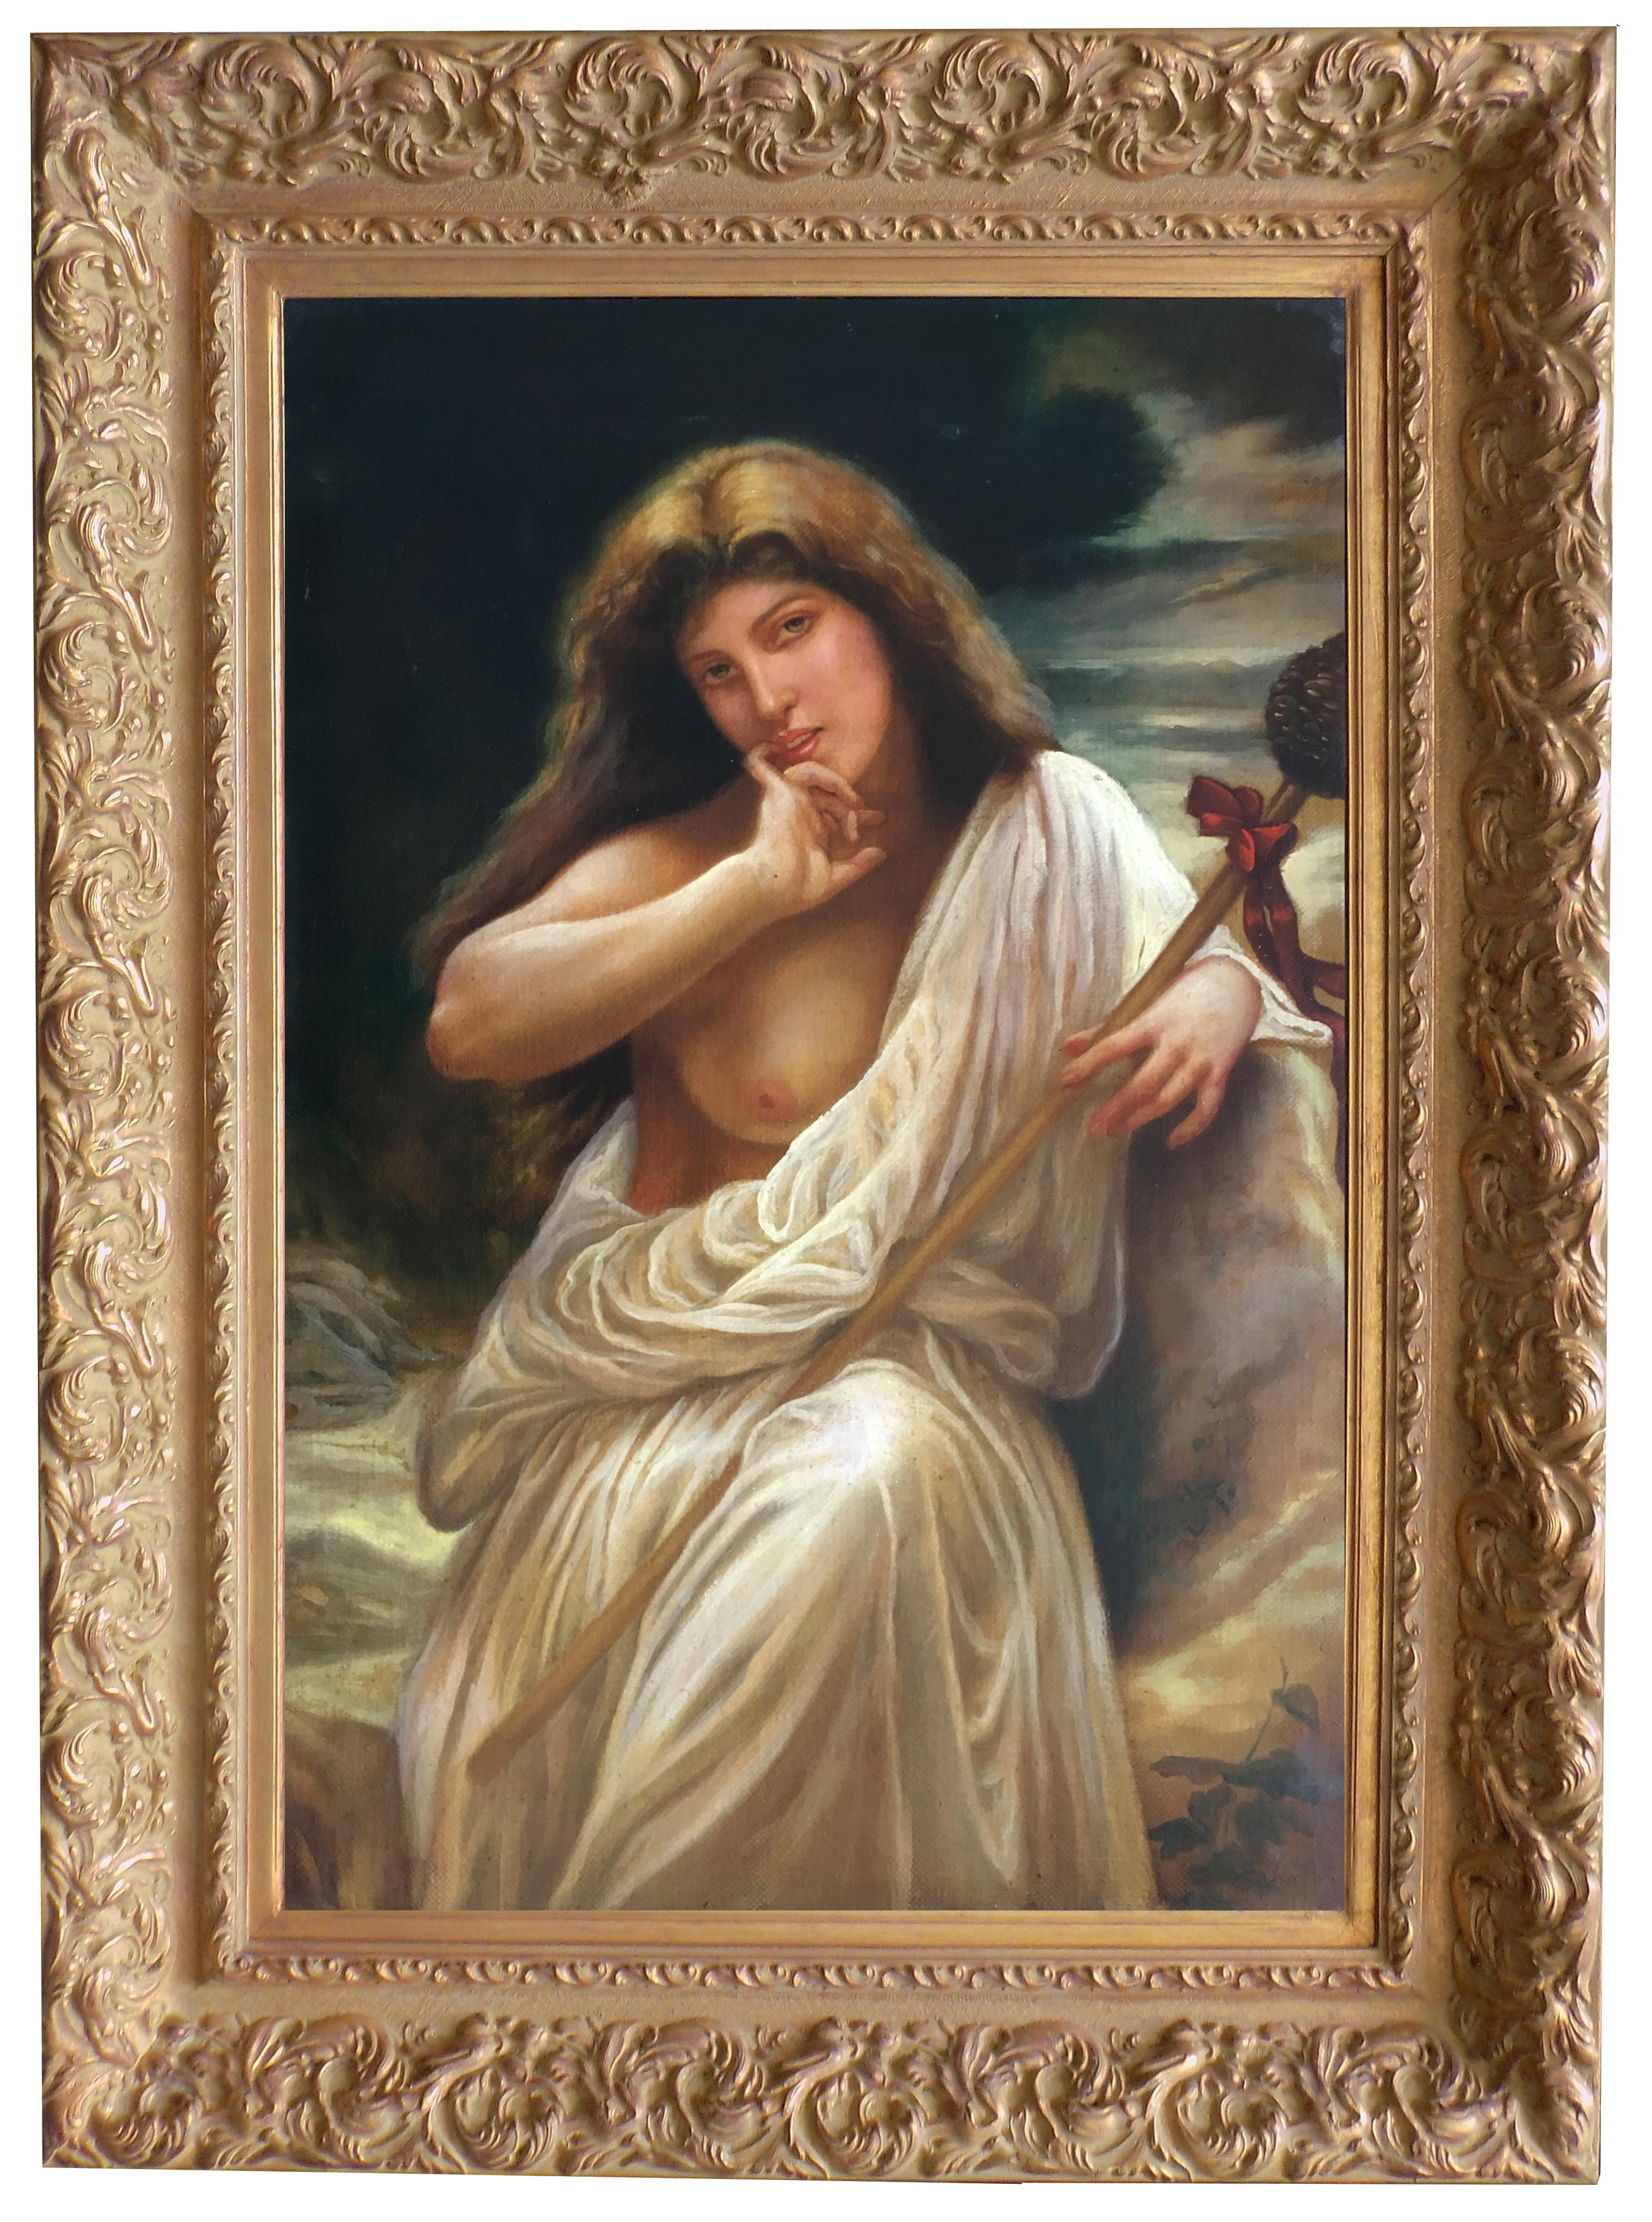 Giulio Di Sotto Portrait Painting - VESTALE-In the Manner of Bouguereau- Italian Figurative oil on canvas paint.